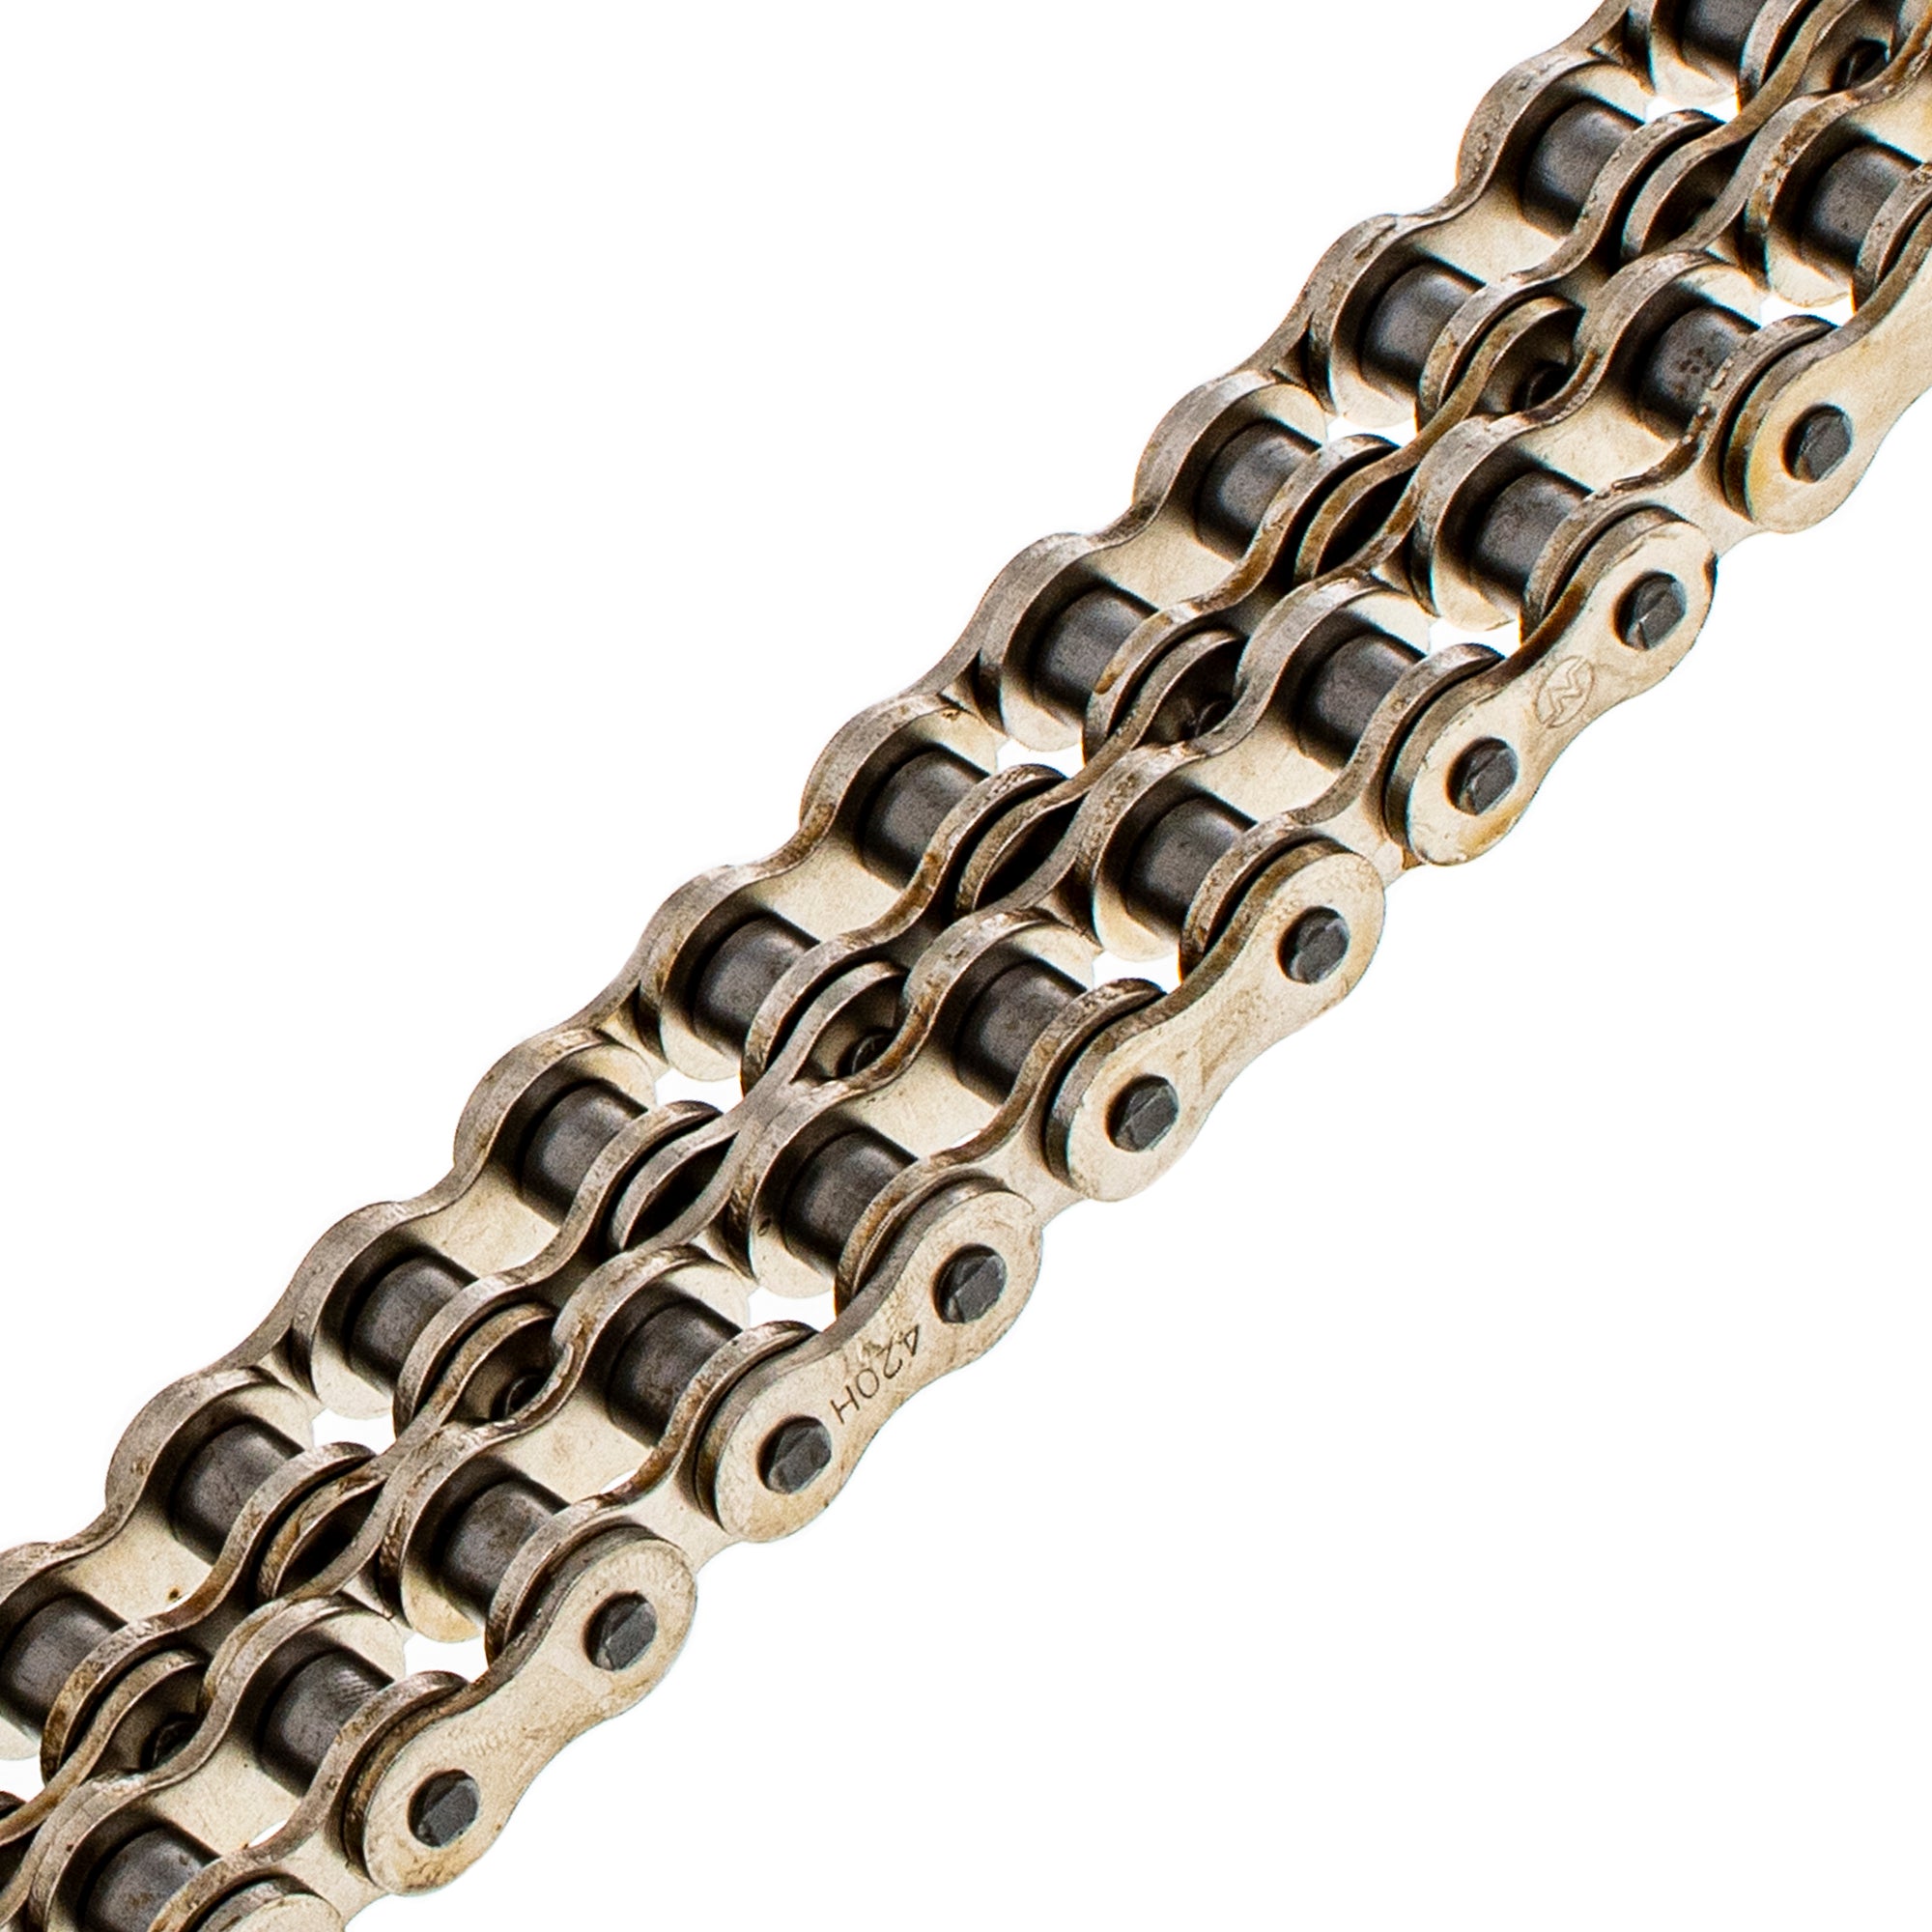 Drive Chain 72 Standard Non O-Ring w/ Master Link for zOTHER FourTrax ATC70 5162 NICHE 519-CDC2273H